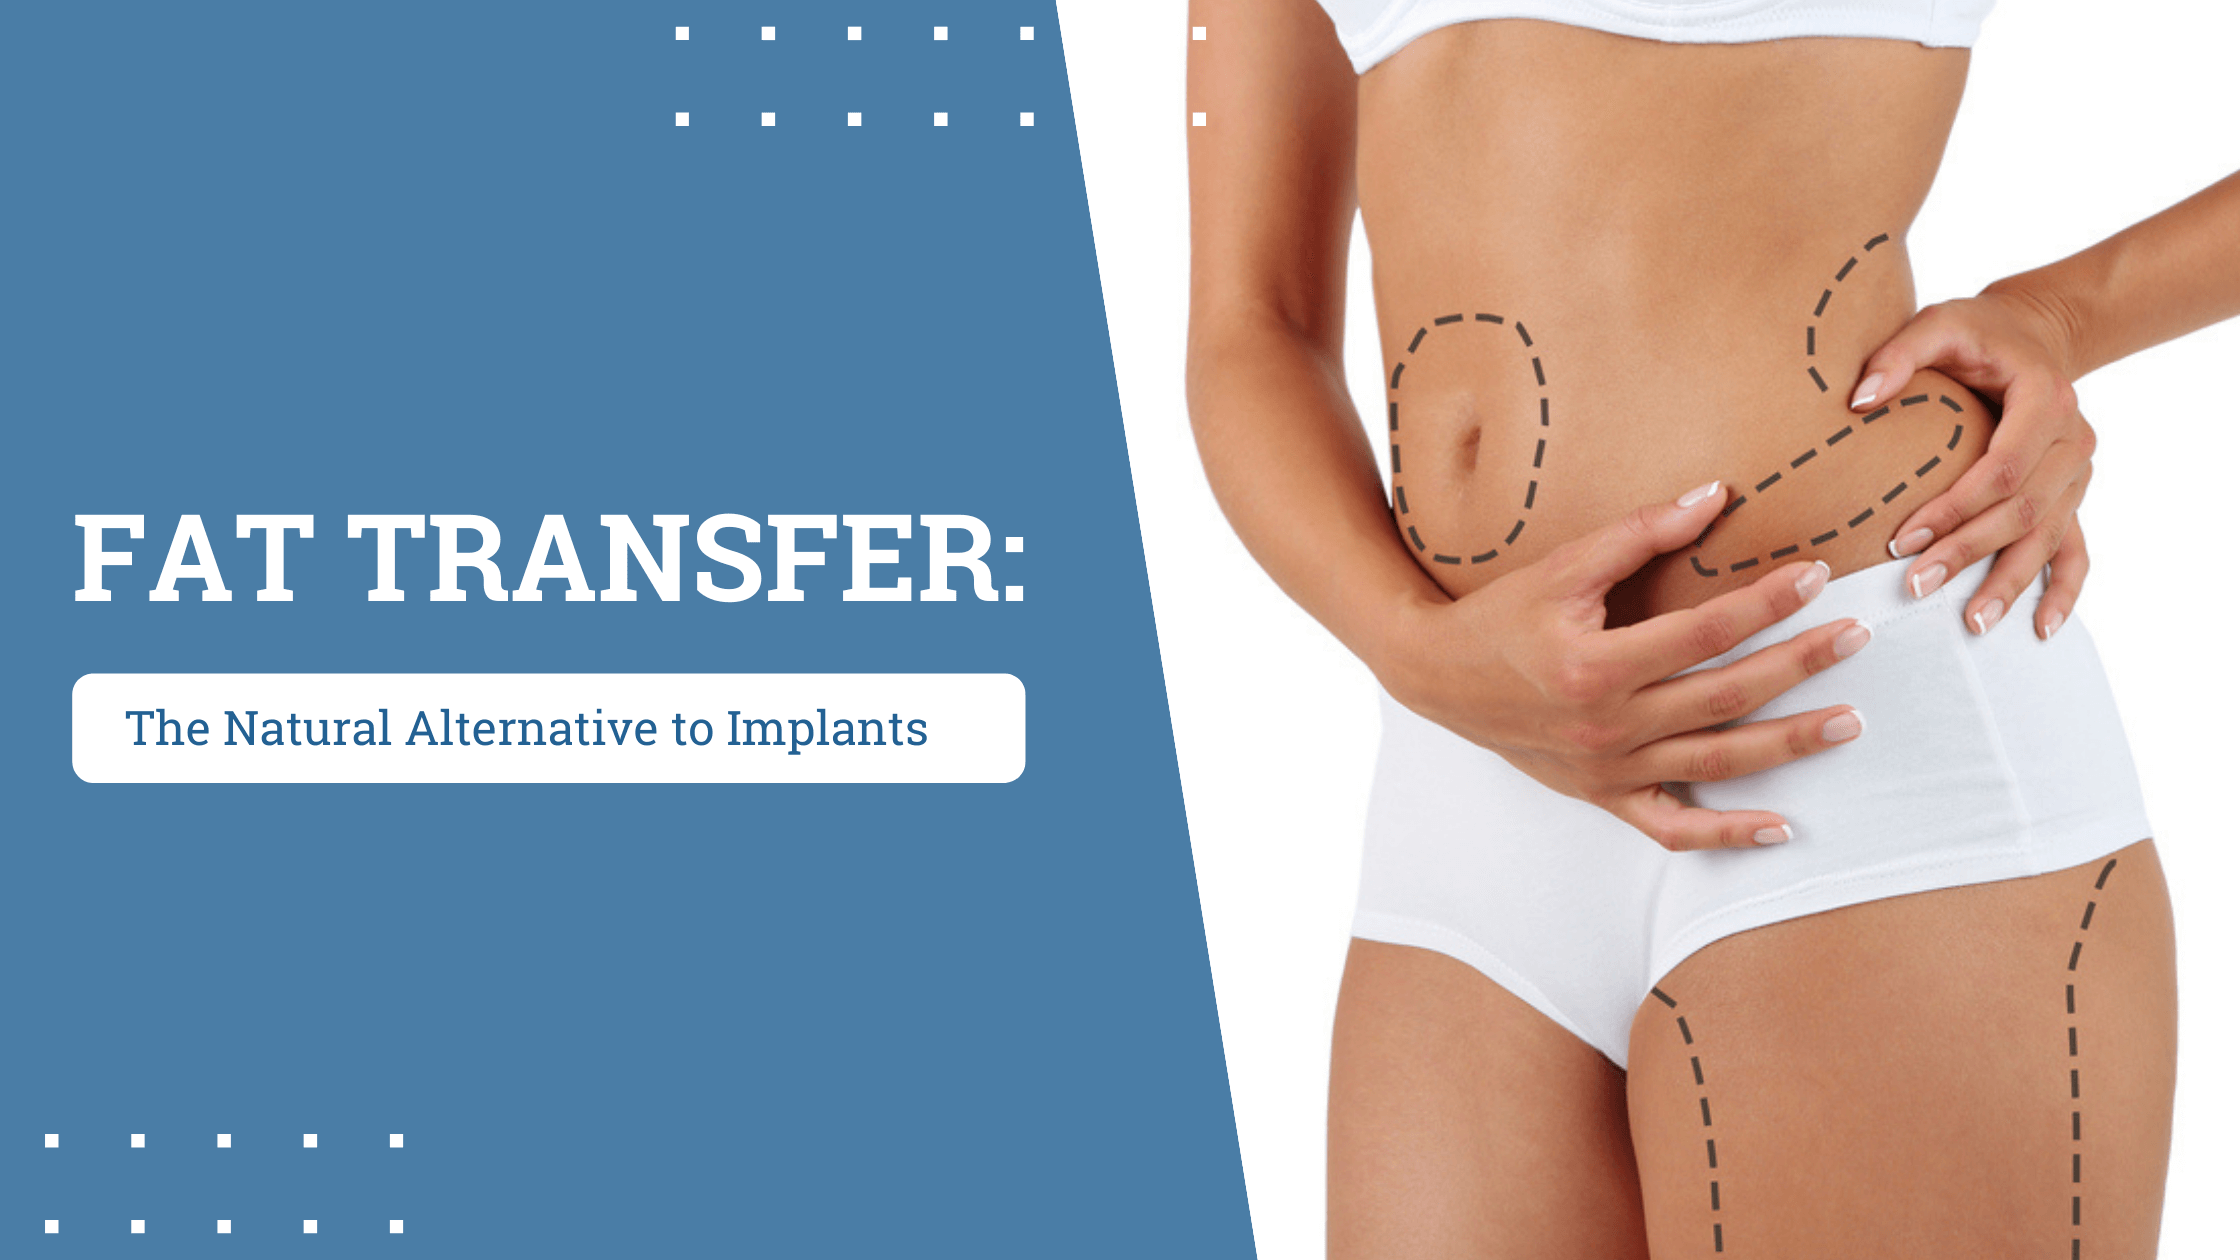 Fat Transfer: The Natural Alternative to Implants